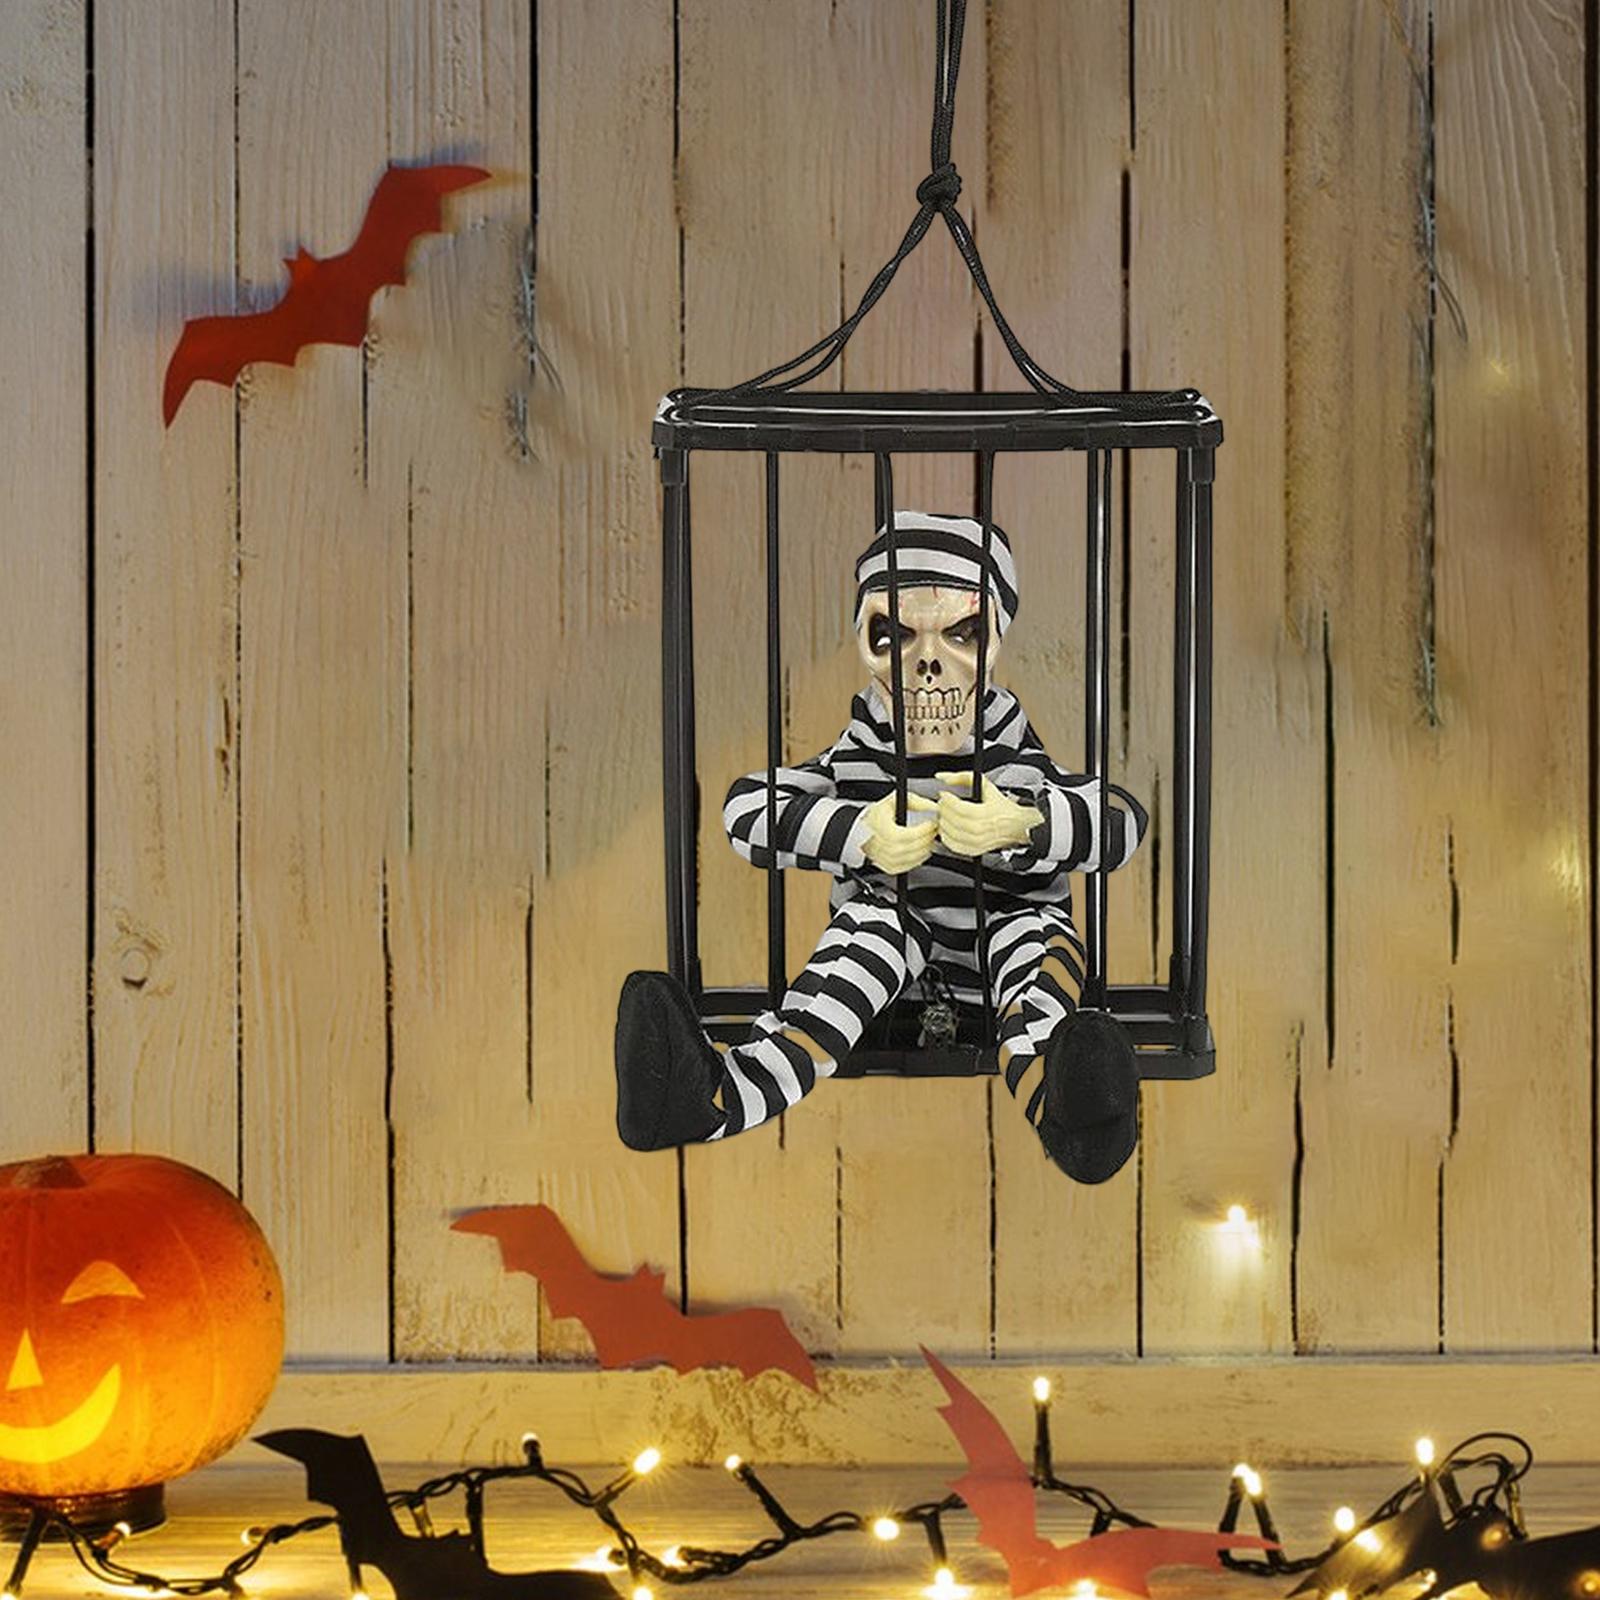 Screaming Animated Decorations Halloween Scary Talking Skull Cage Prisoner Hooded Cage Specter